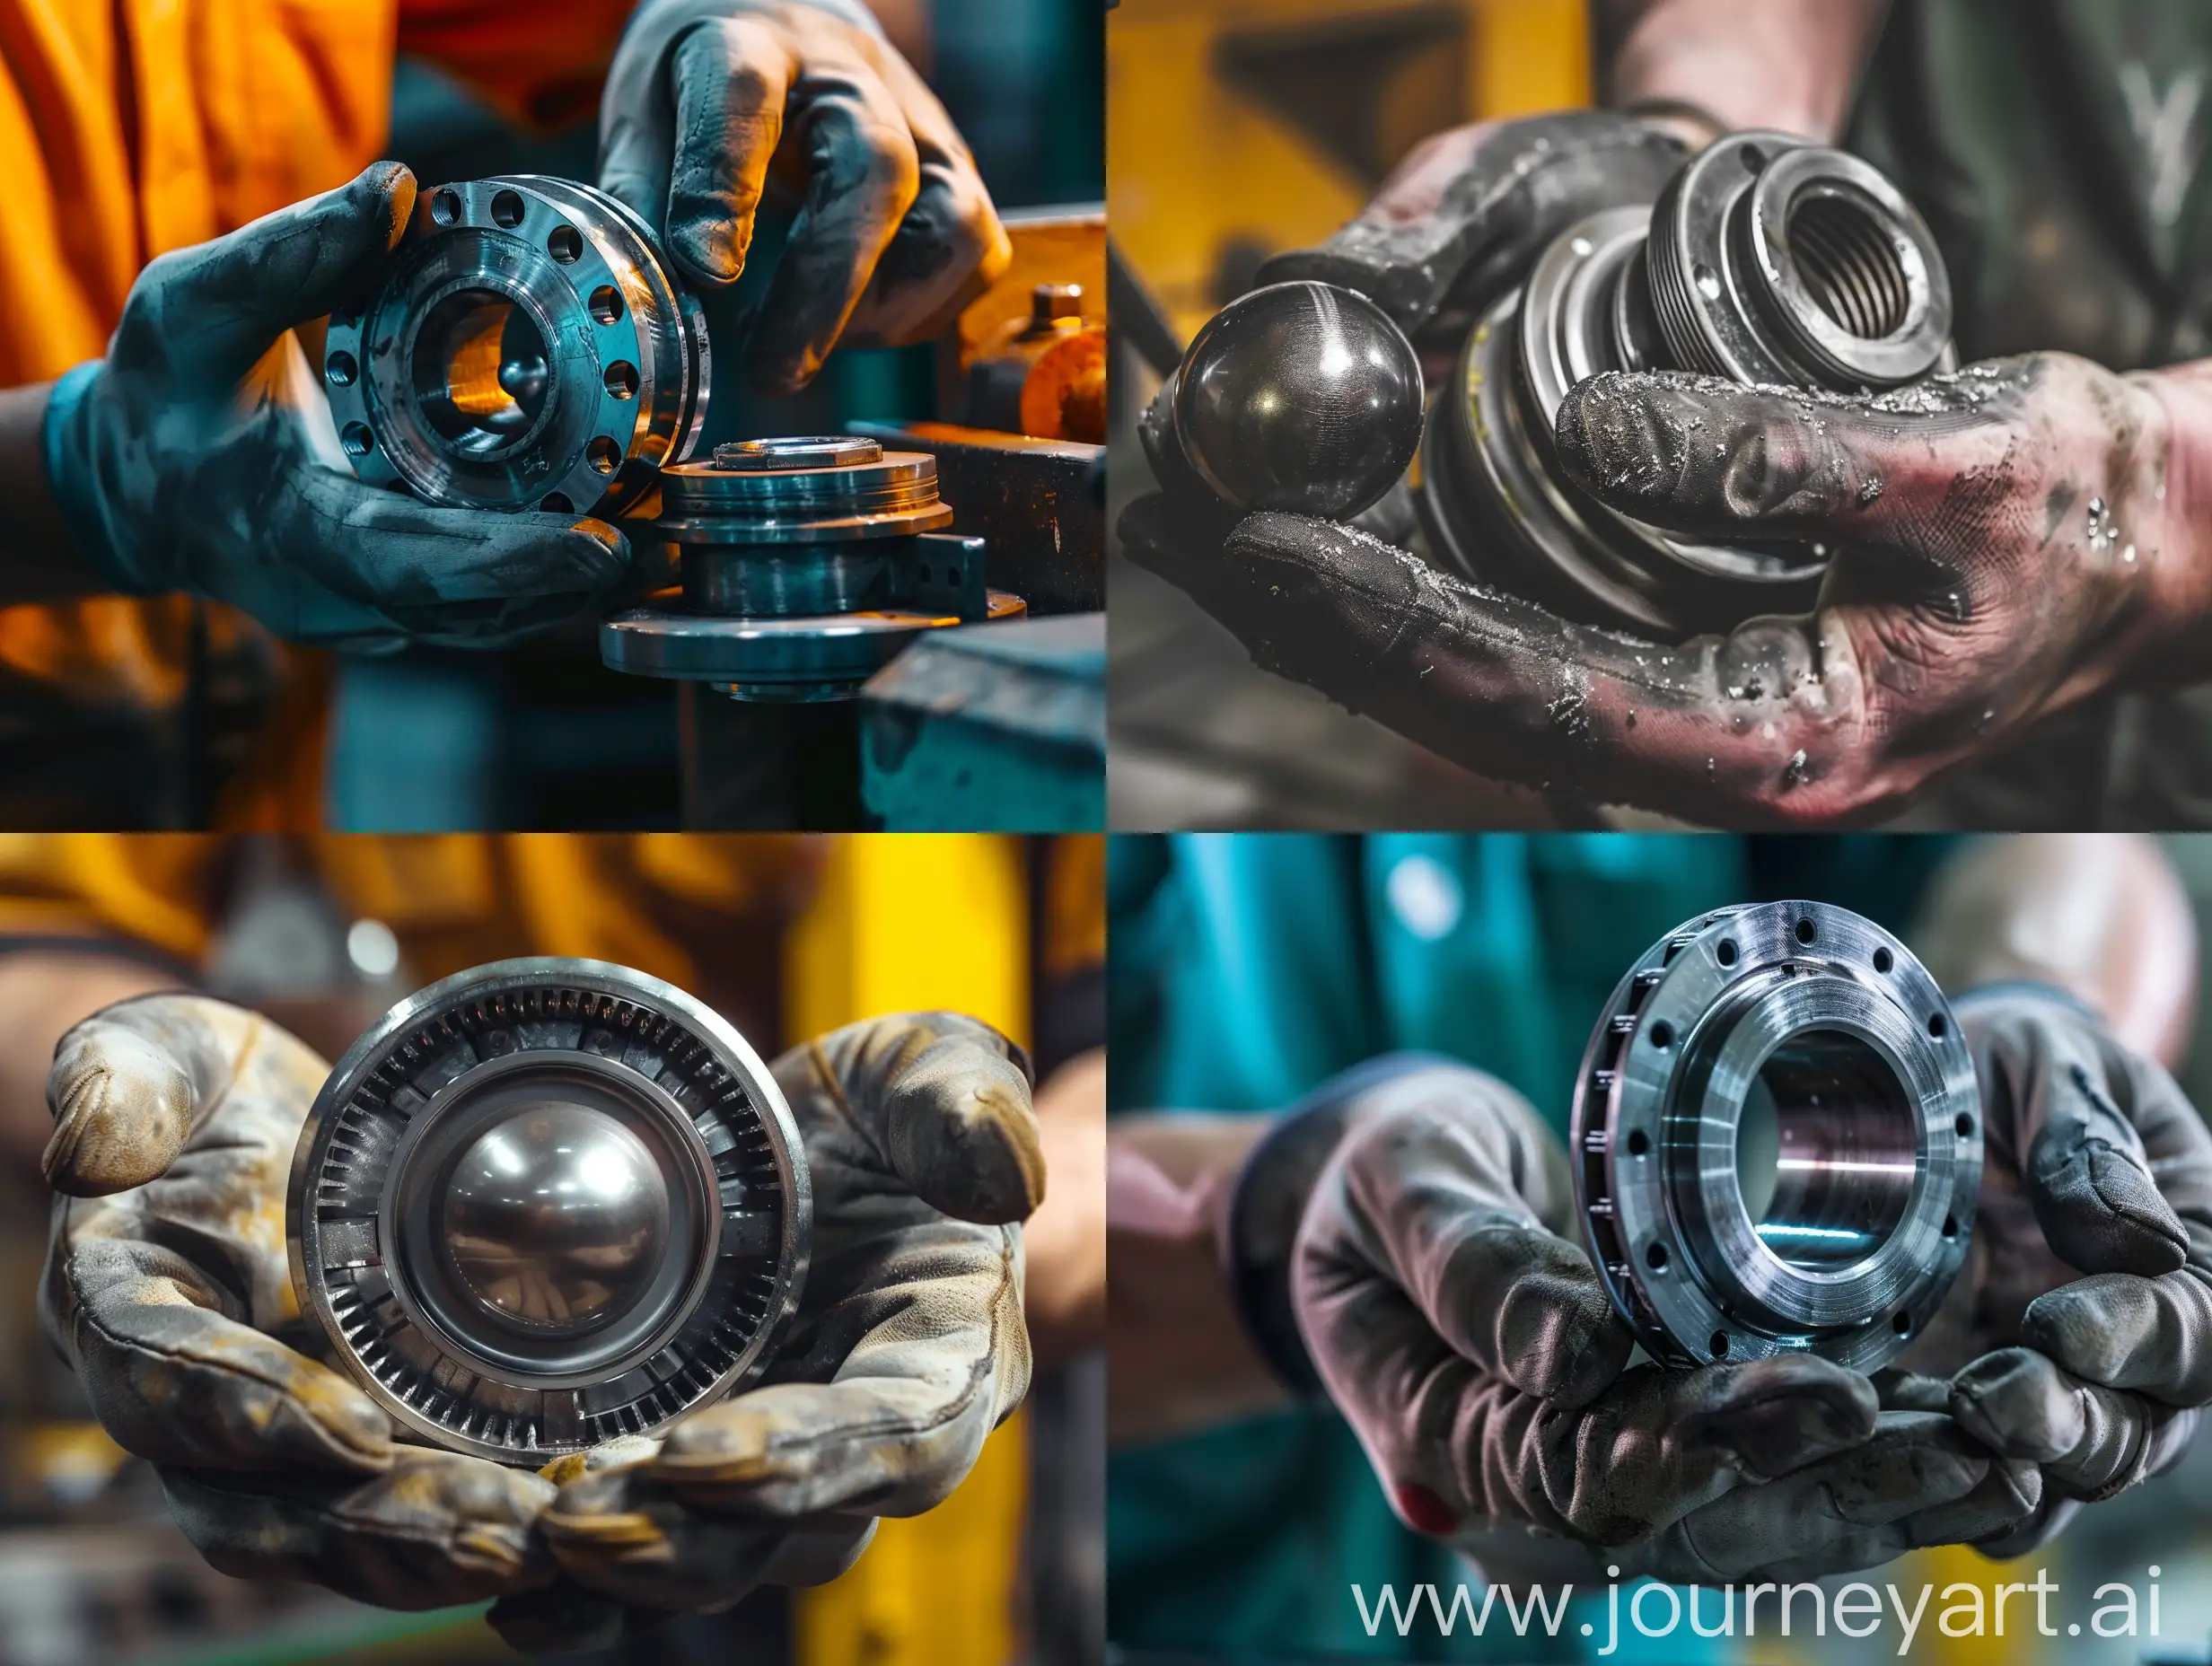 a ball bearing in the hands of a mechanic,
